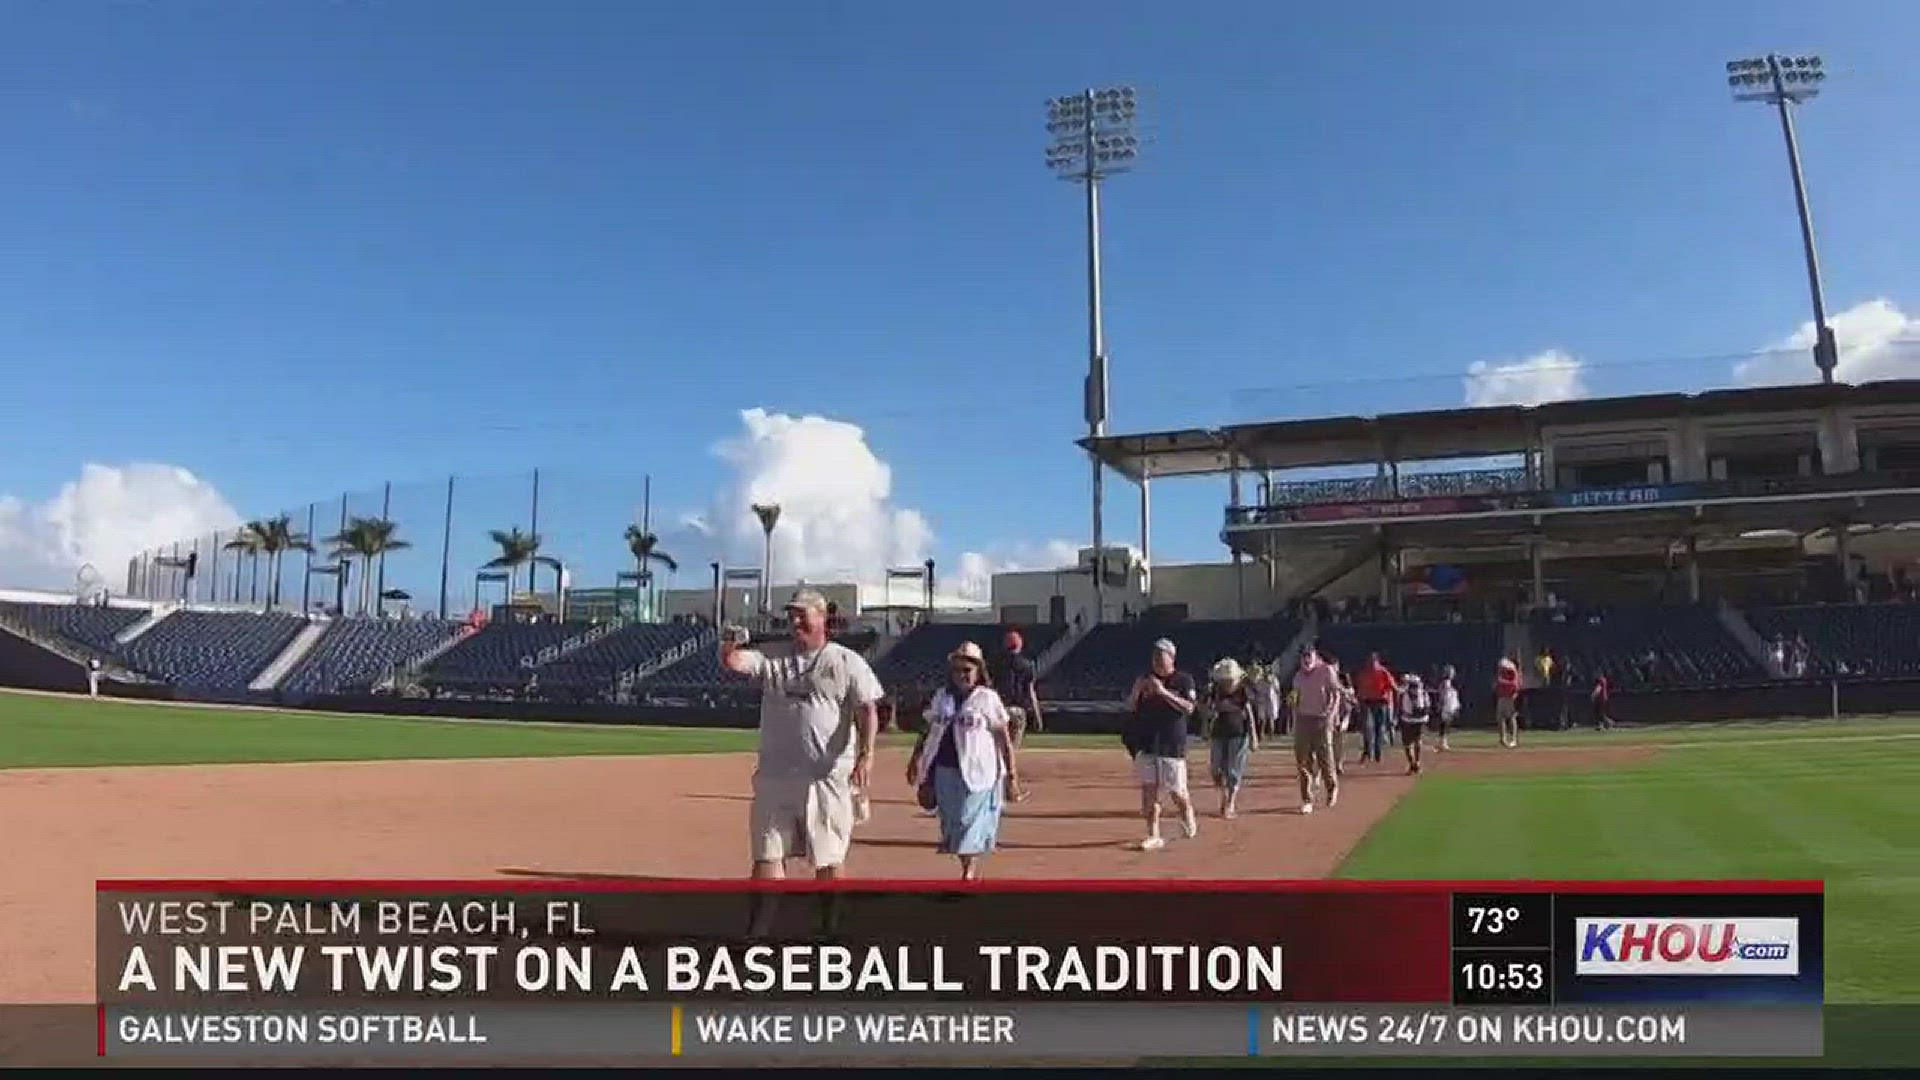 Senior citizens are welcomed to walk along the bases at the Astros spring training camp each Saturday for the Senior Stroll.